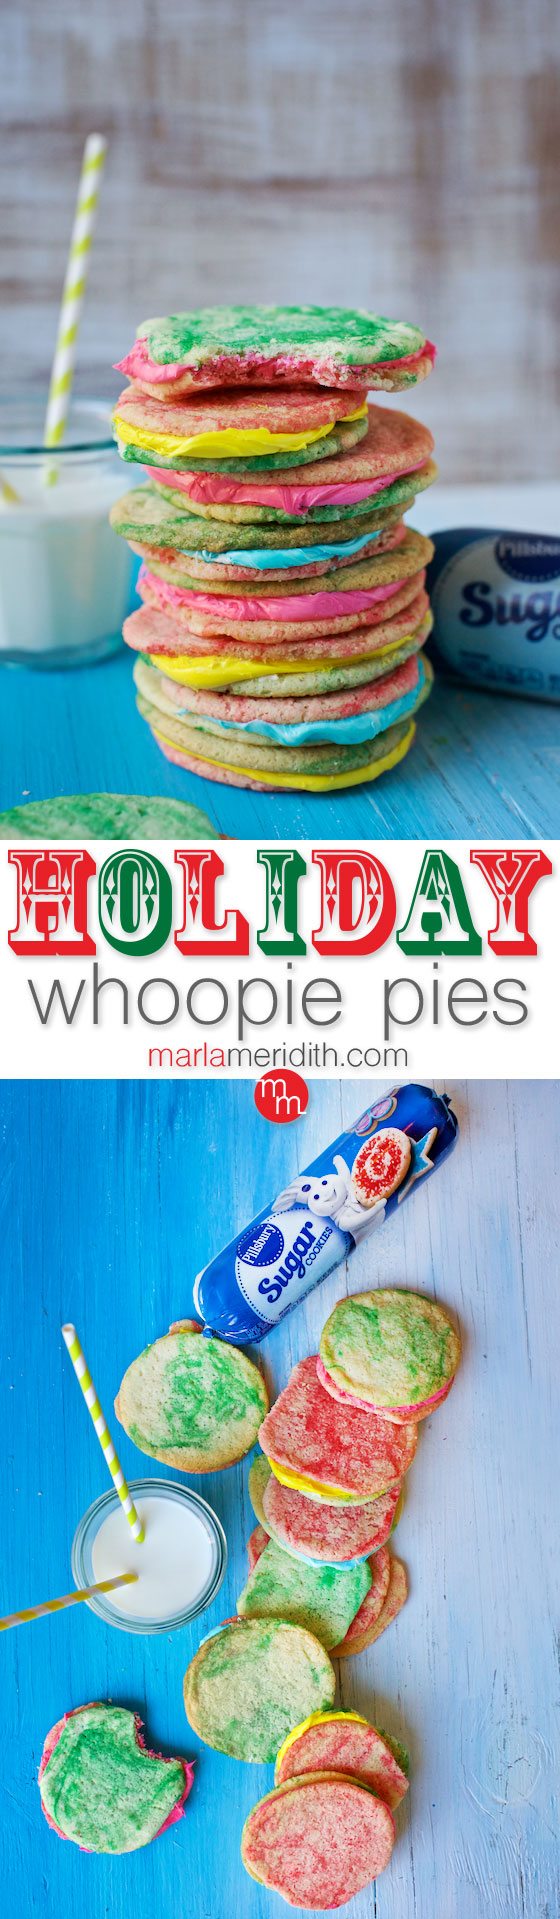 Holiday Whoopie Pies, a super easy treat to make for the holidays! @pillsbury #ItsBakingSeason MarlaMeridith.com ( @marlameridith )